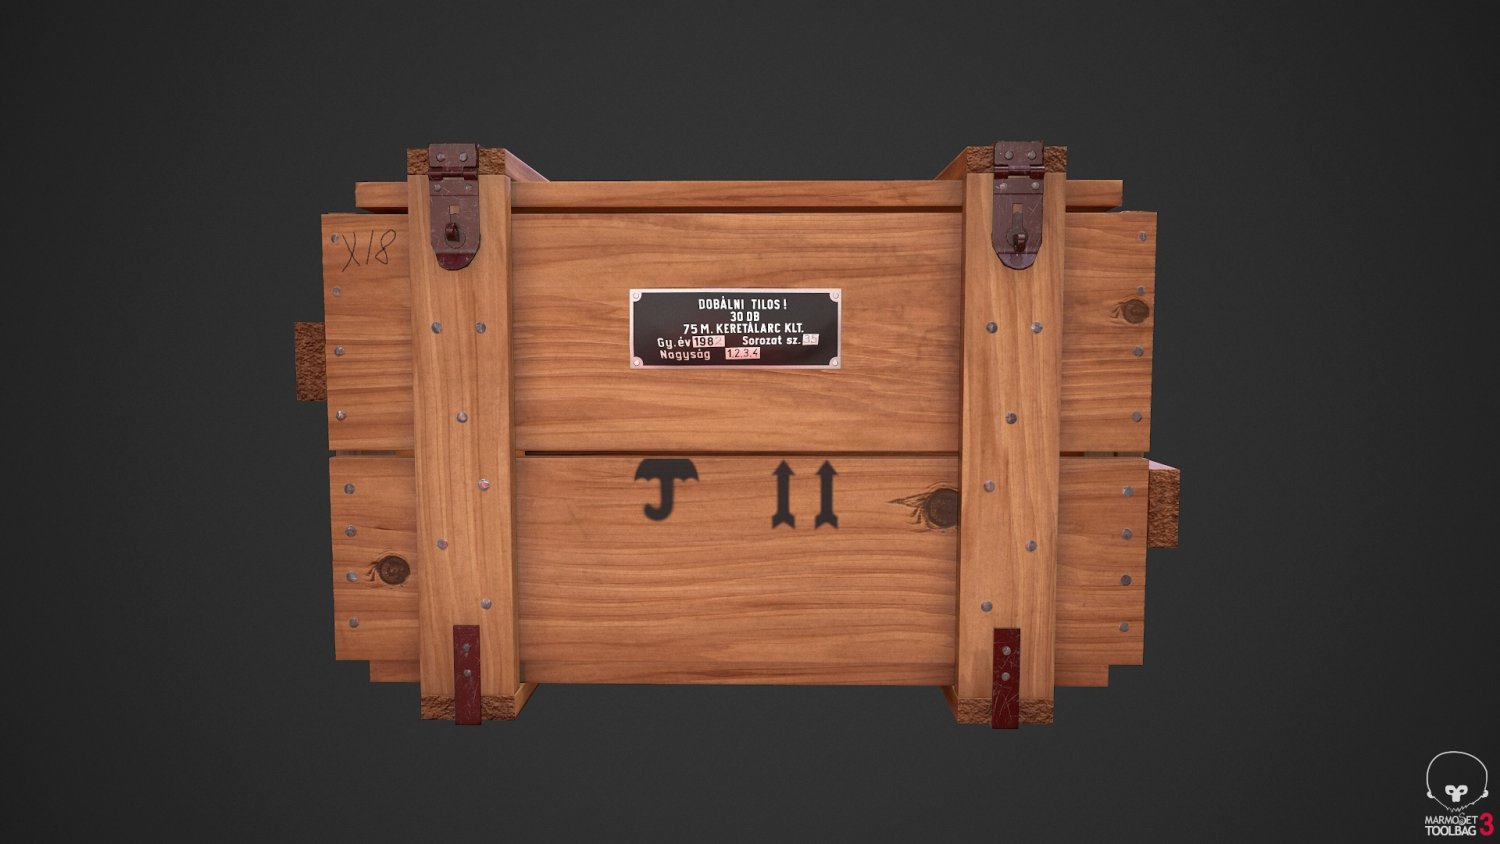 Old Match Box free VR / AR / low-poly 3D model